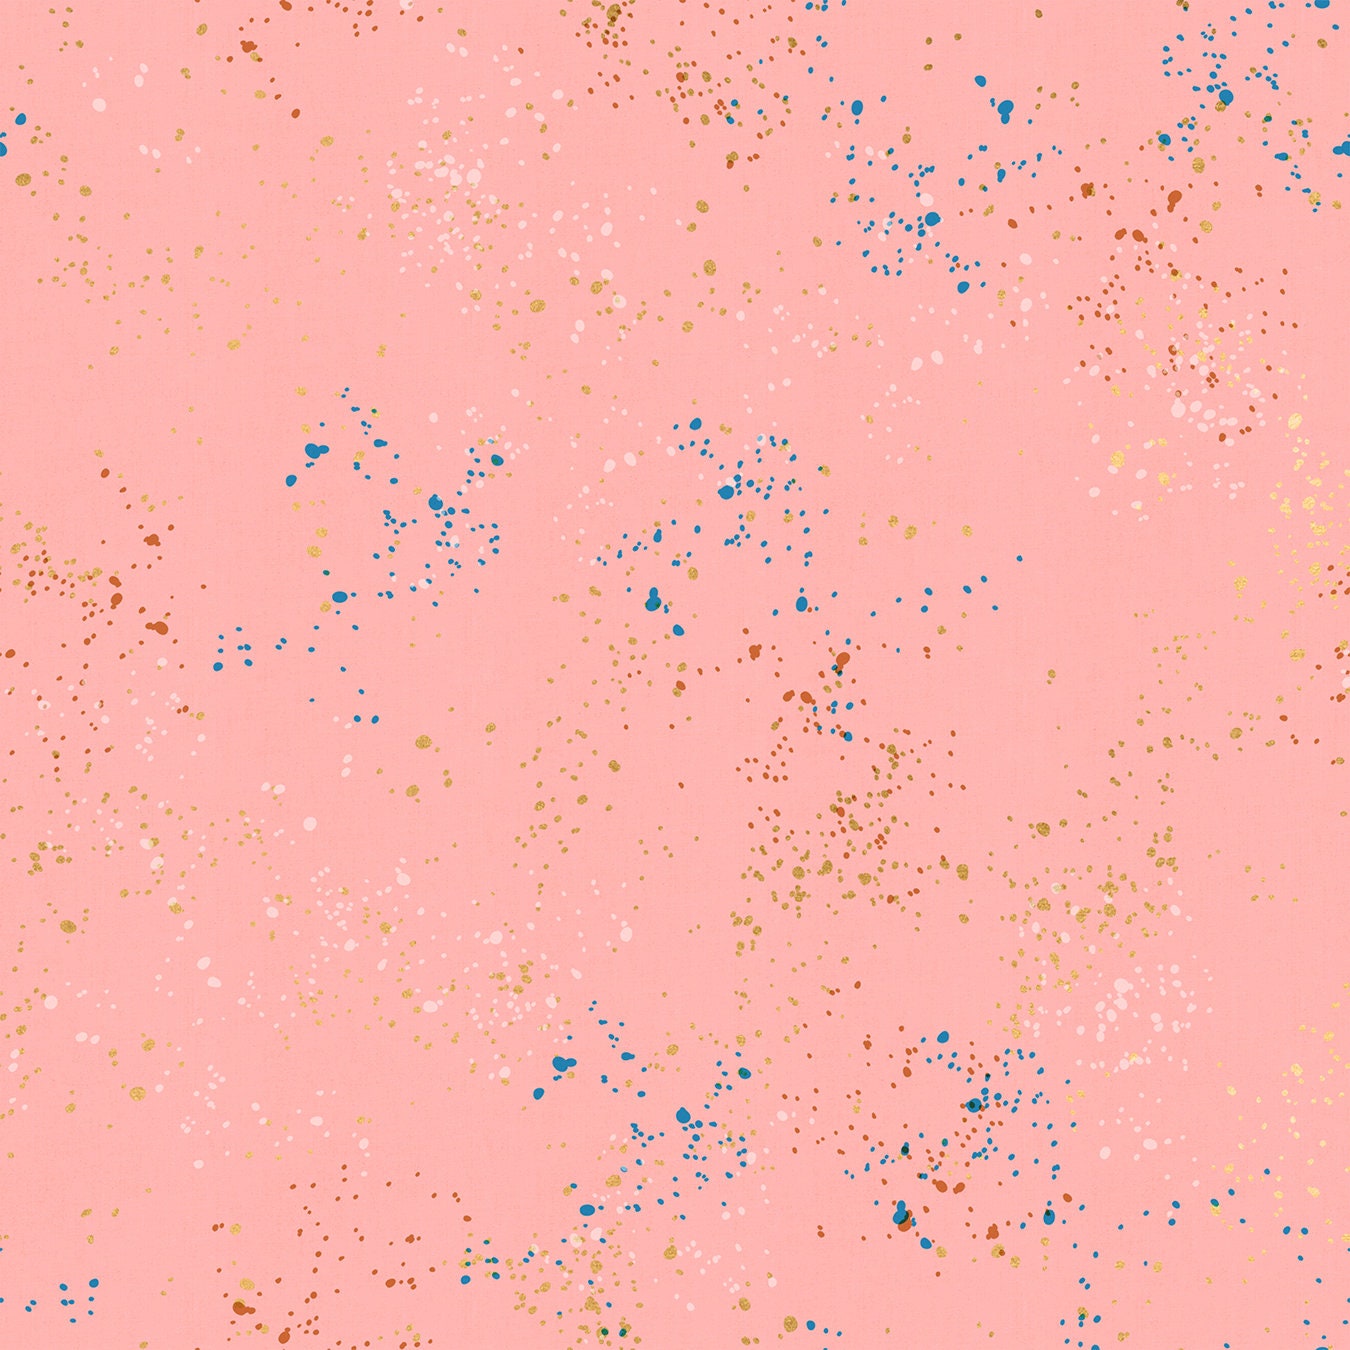 Speckled by Ruby Star Society - Candy Pink